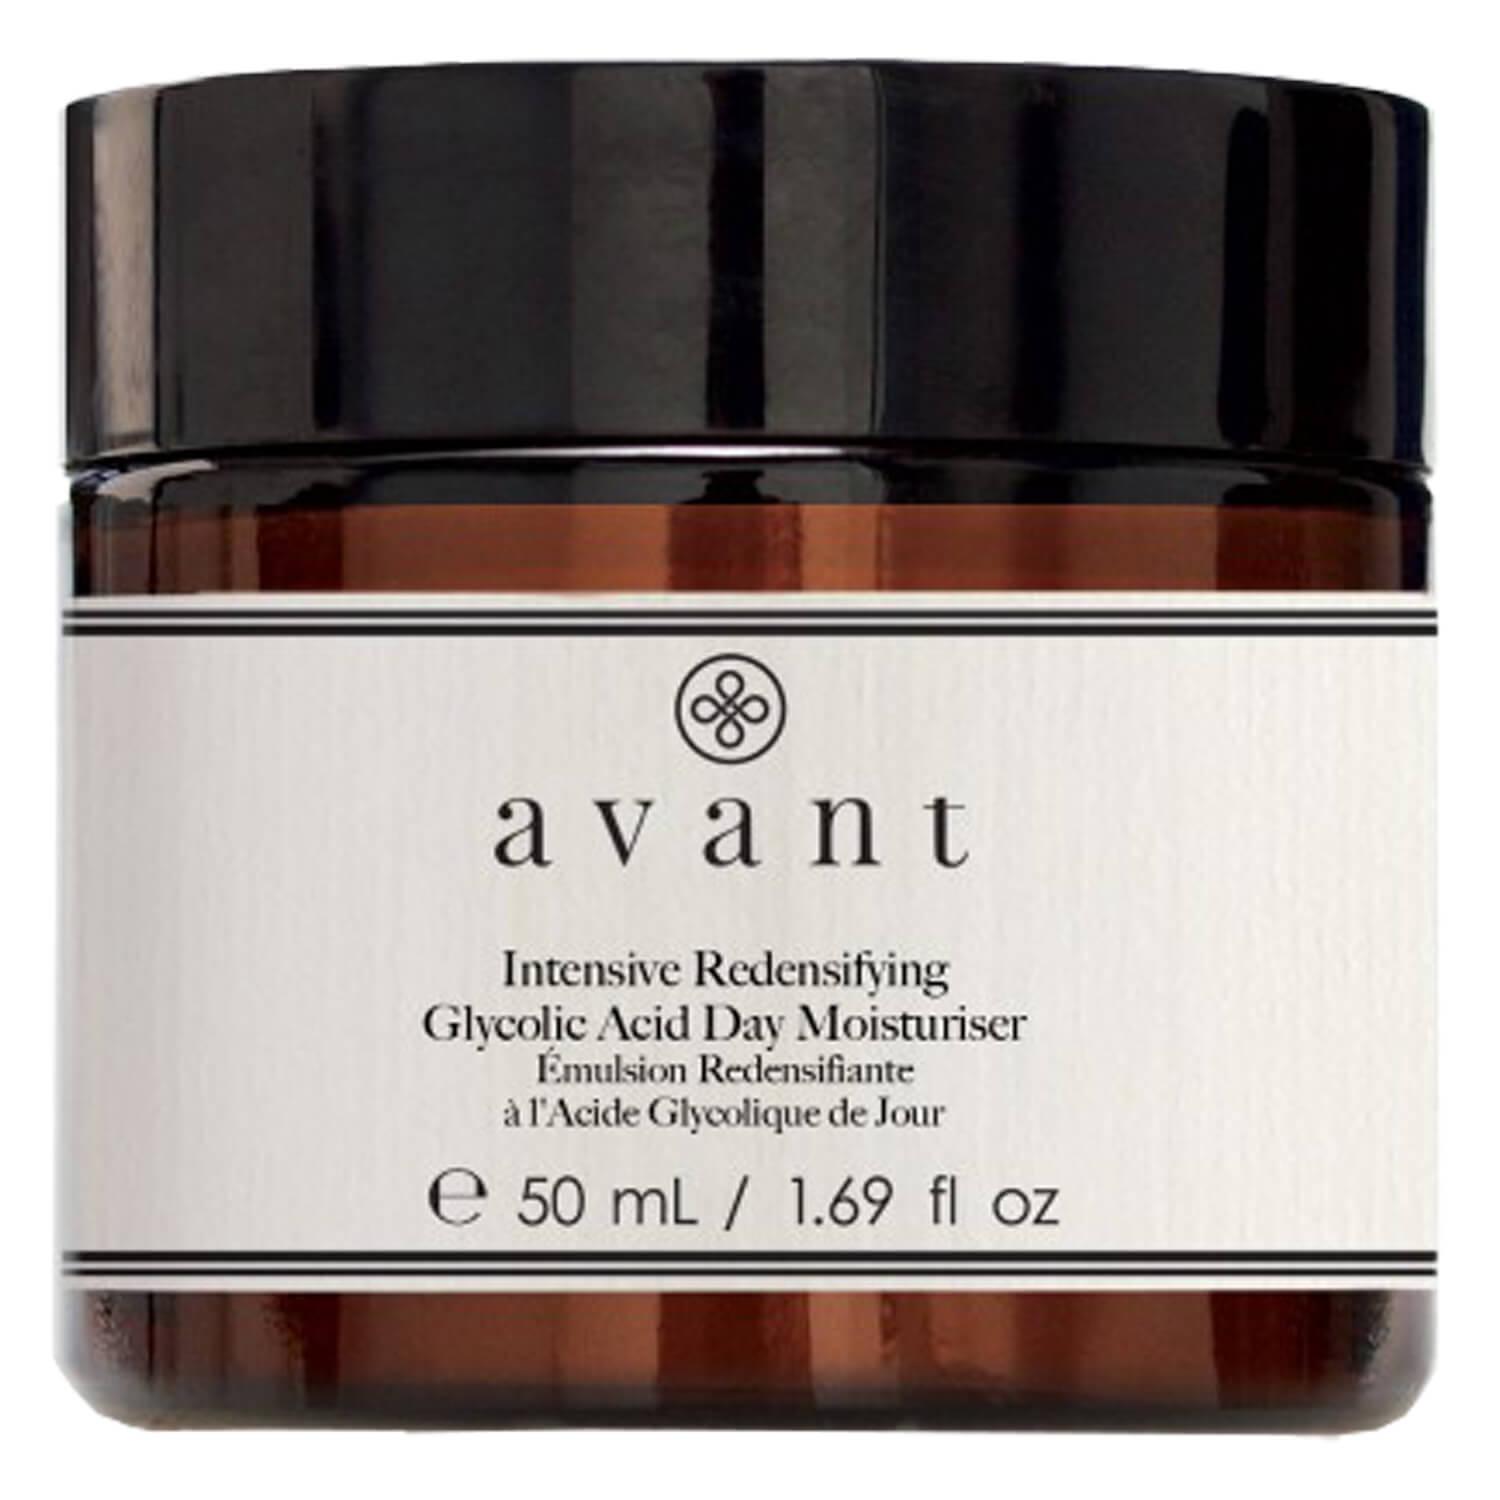 avant - Feuchtigkeitsspendende Glycolic Tagescreme Intensive Redensifying